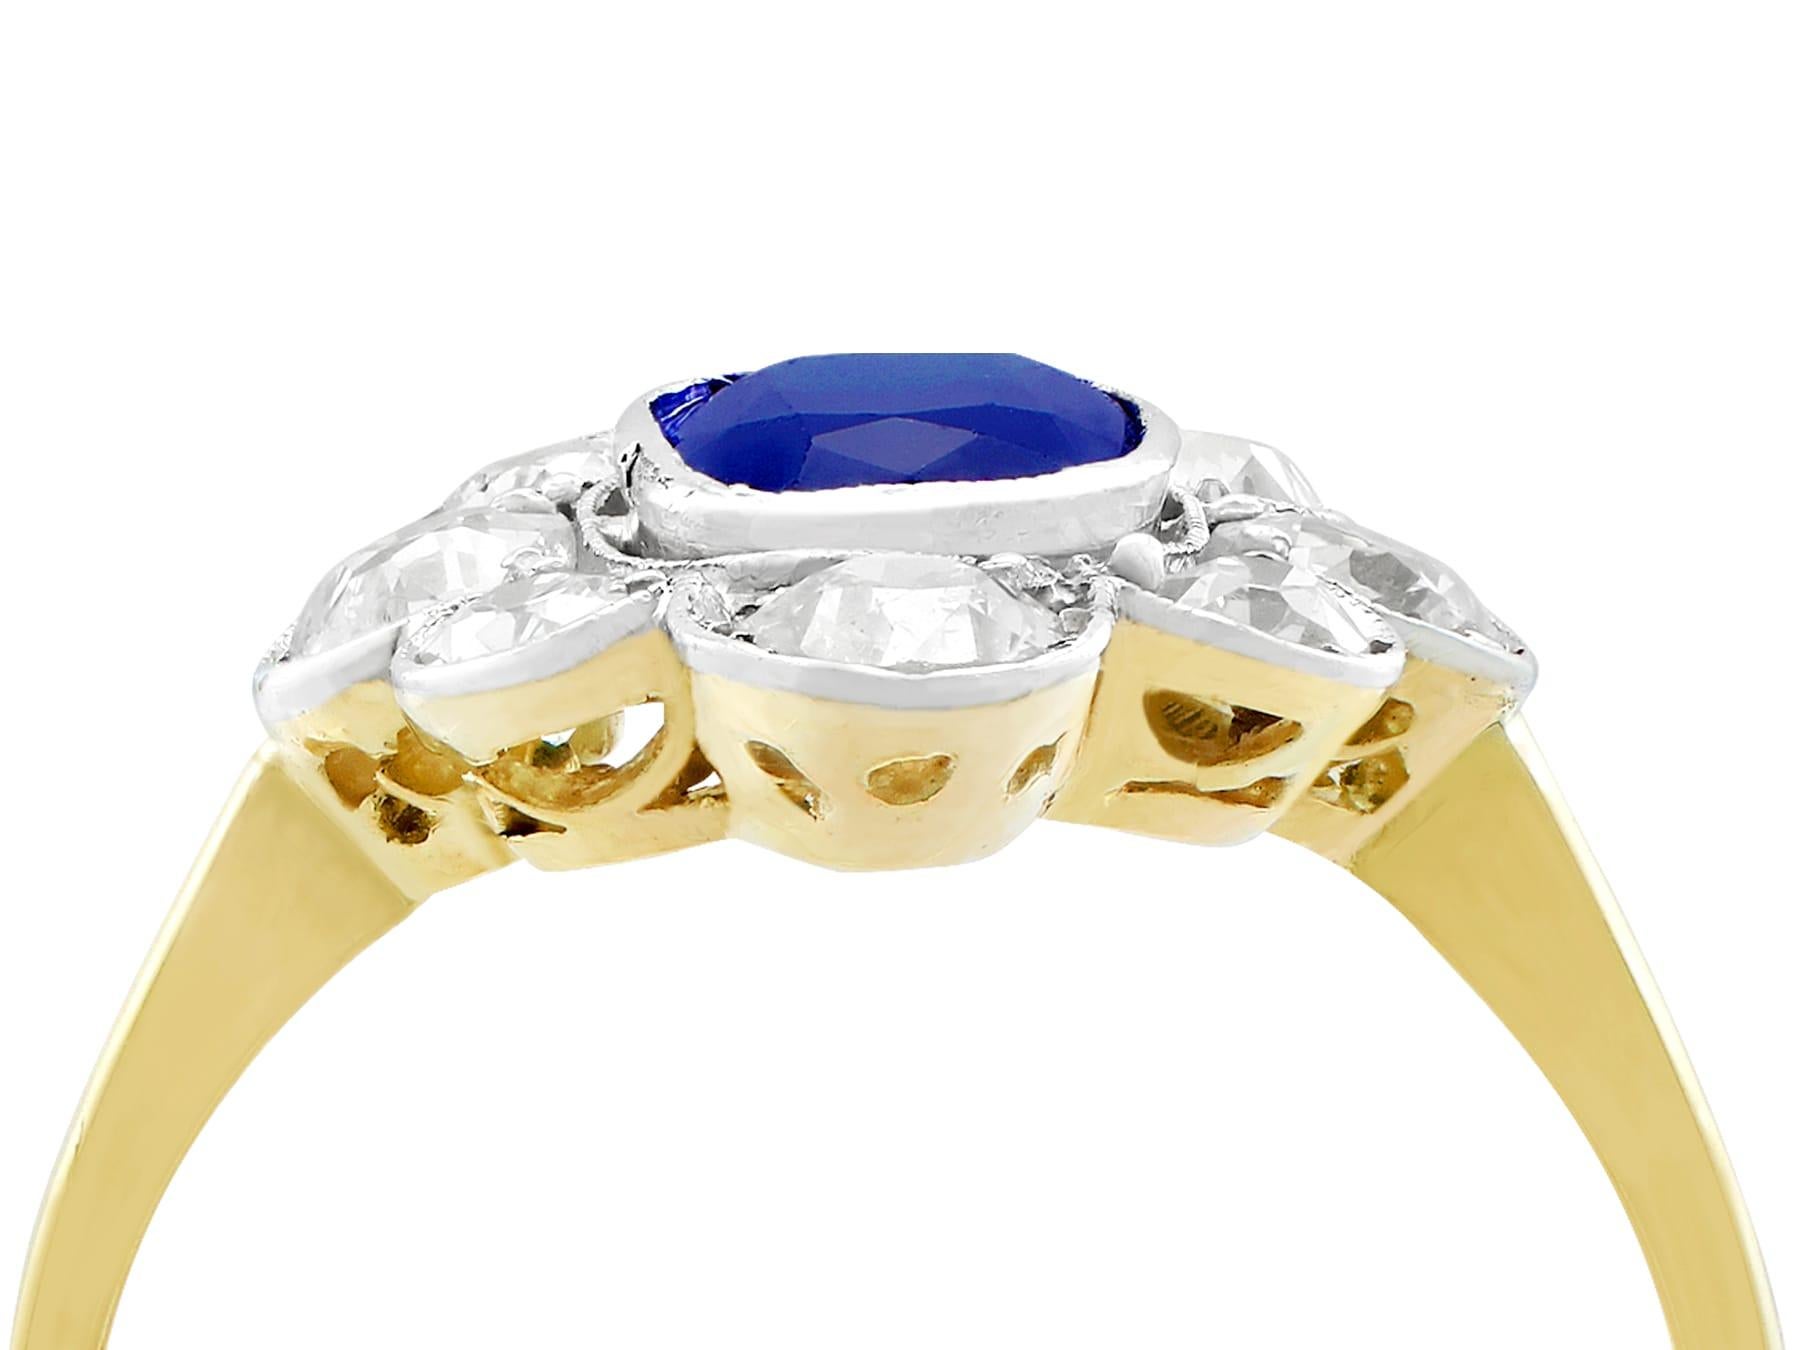 A stunning antique 1.70 carat sapphire and 2.10 carat diamond, 18 karat yellow and white gold dress ring; part of our diverse antique jewelry and estate jewelry collections.

This stunning, fine and impressive 1930s sapphire and diamond ring has